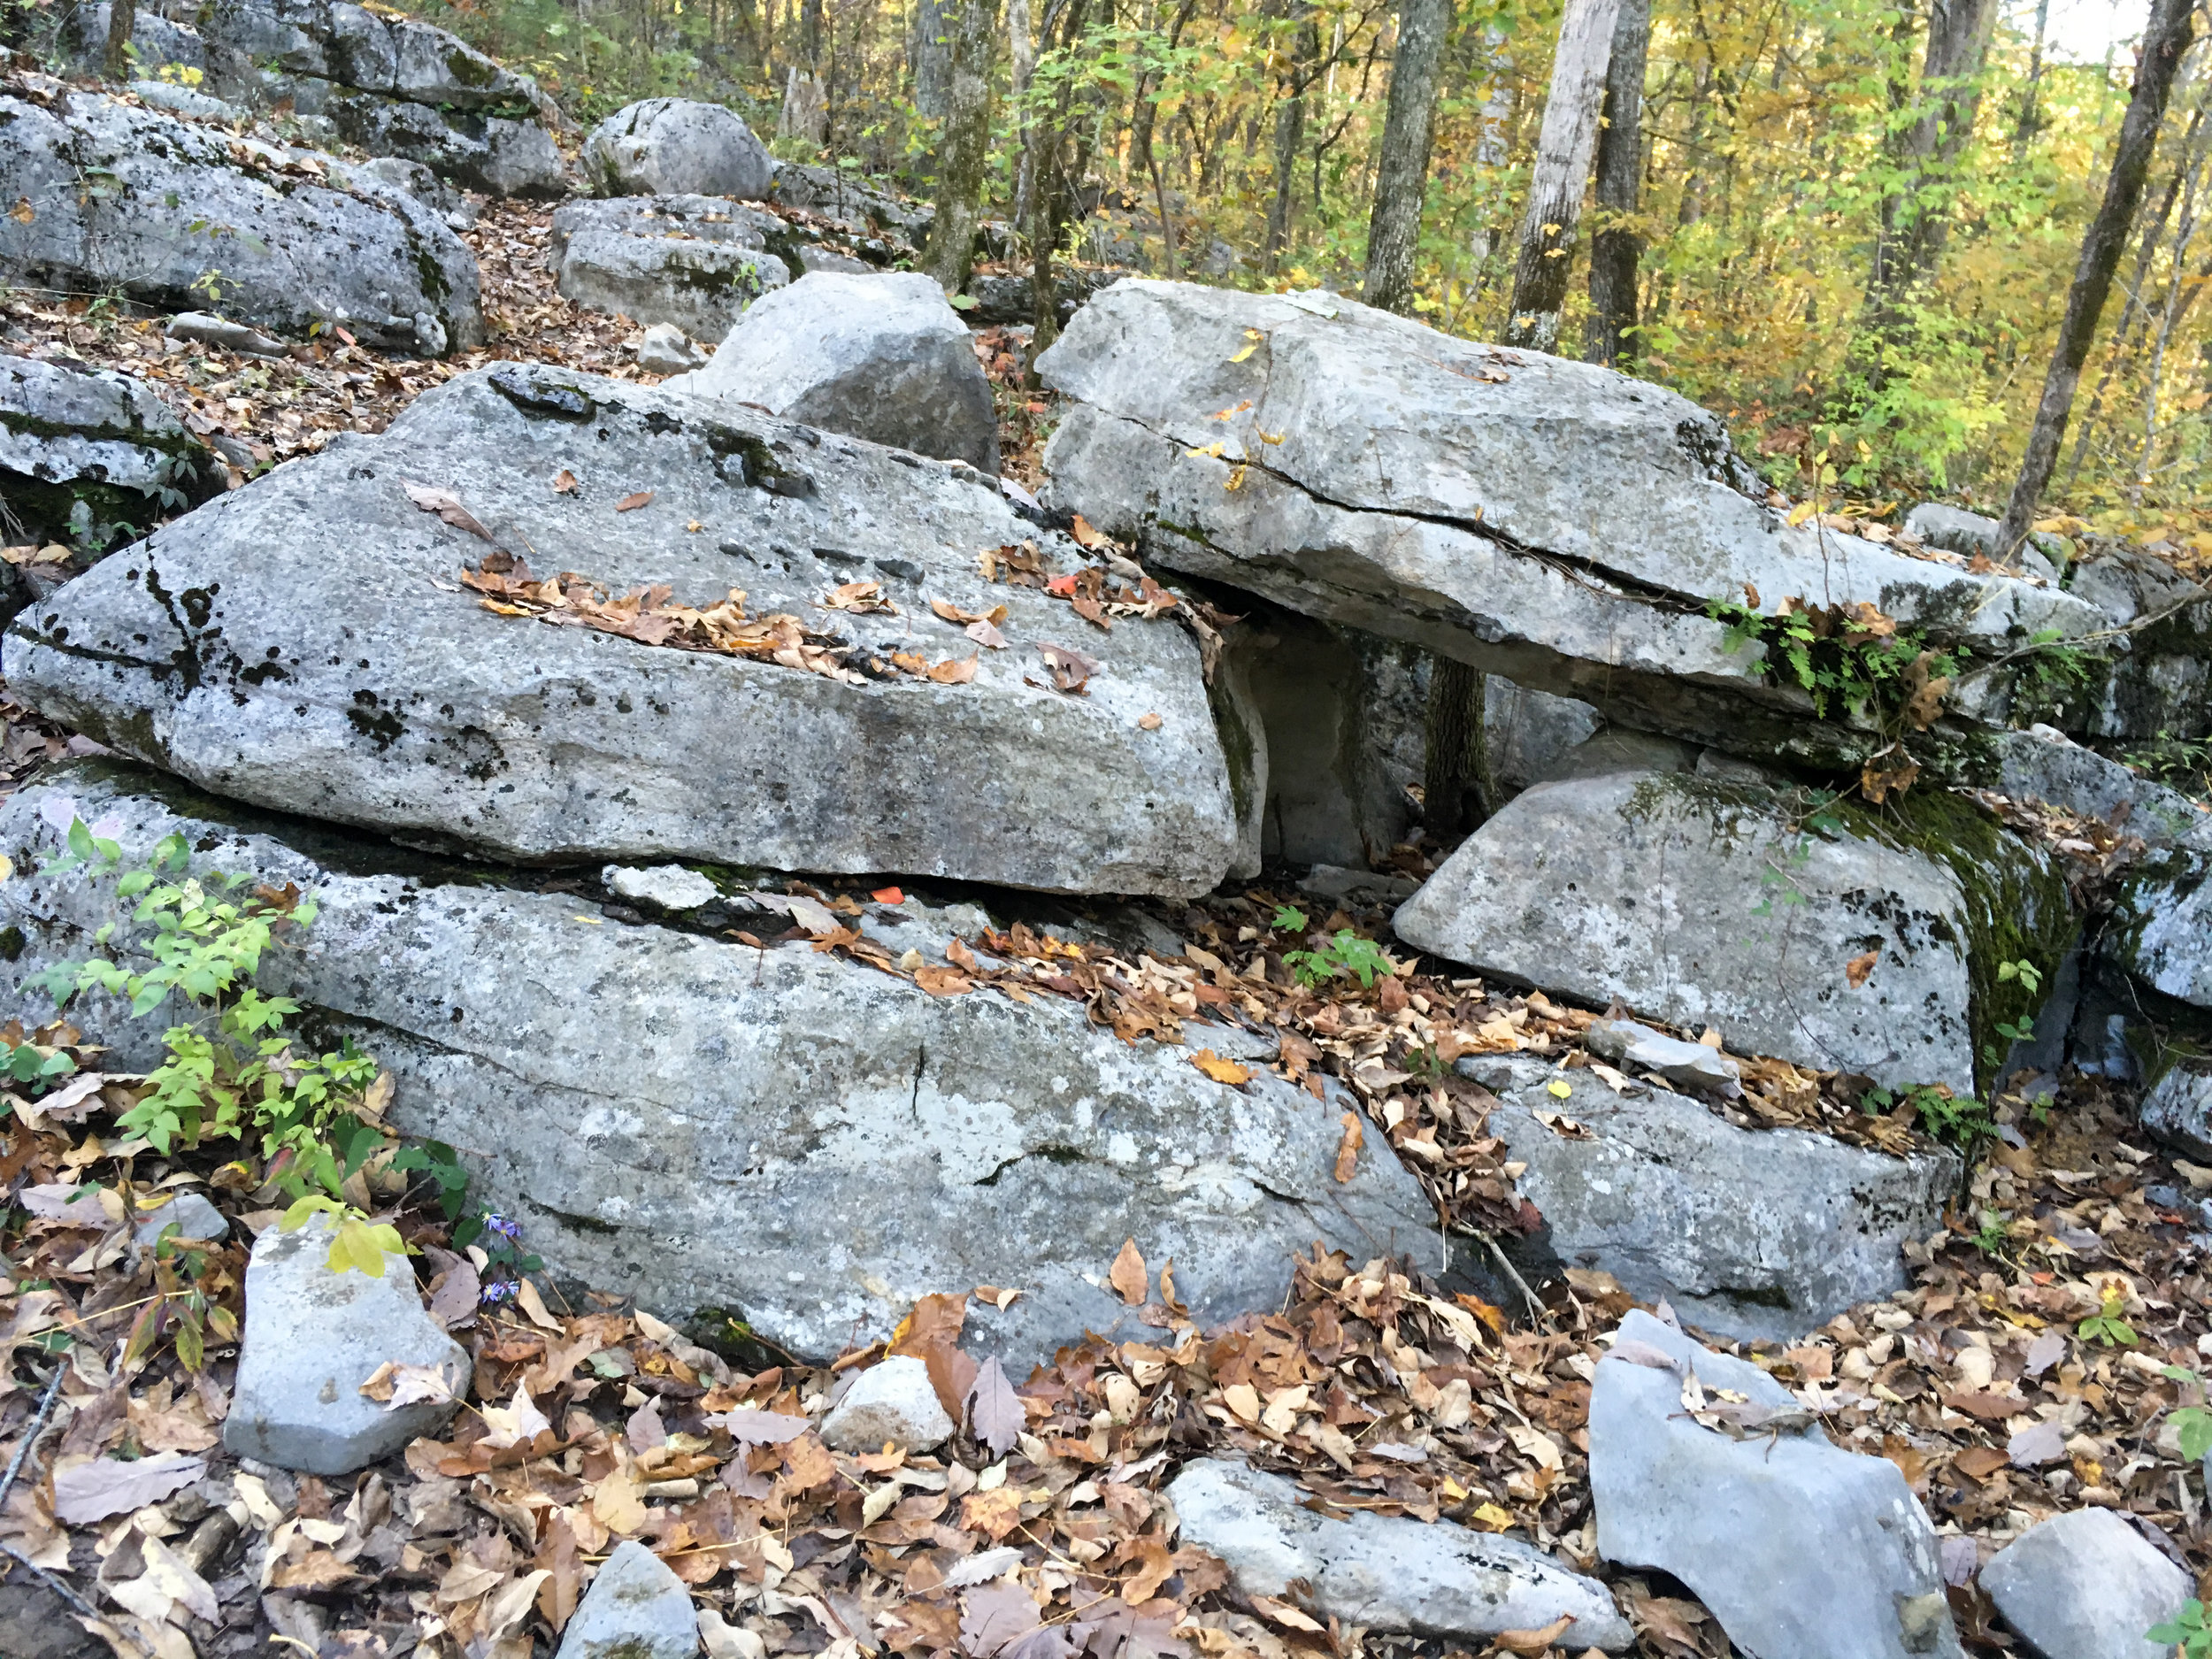 Outside the caverns, near the hiking trails; November 6, 2018